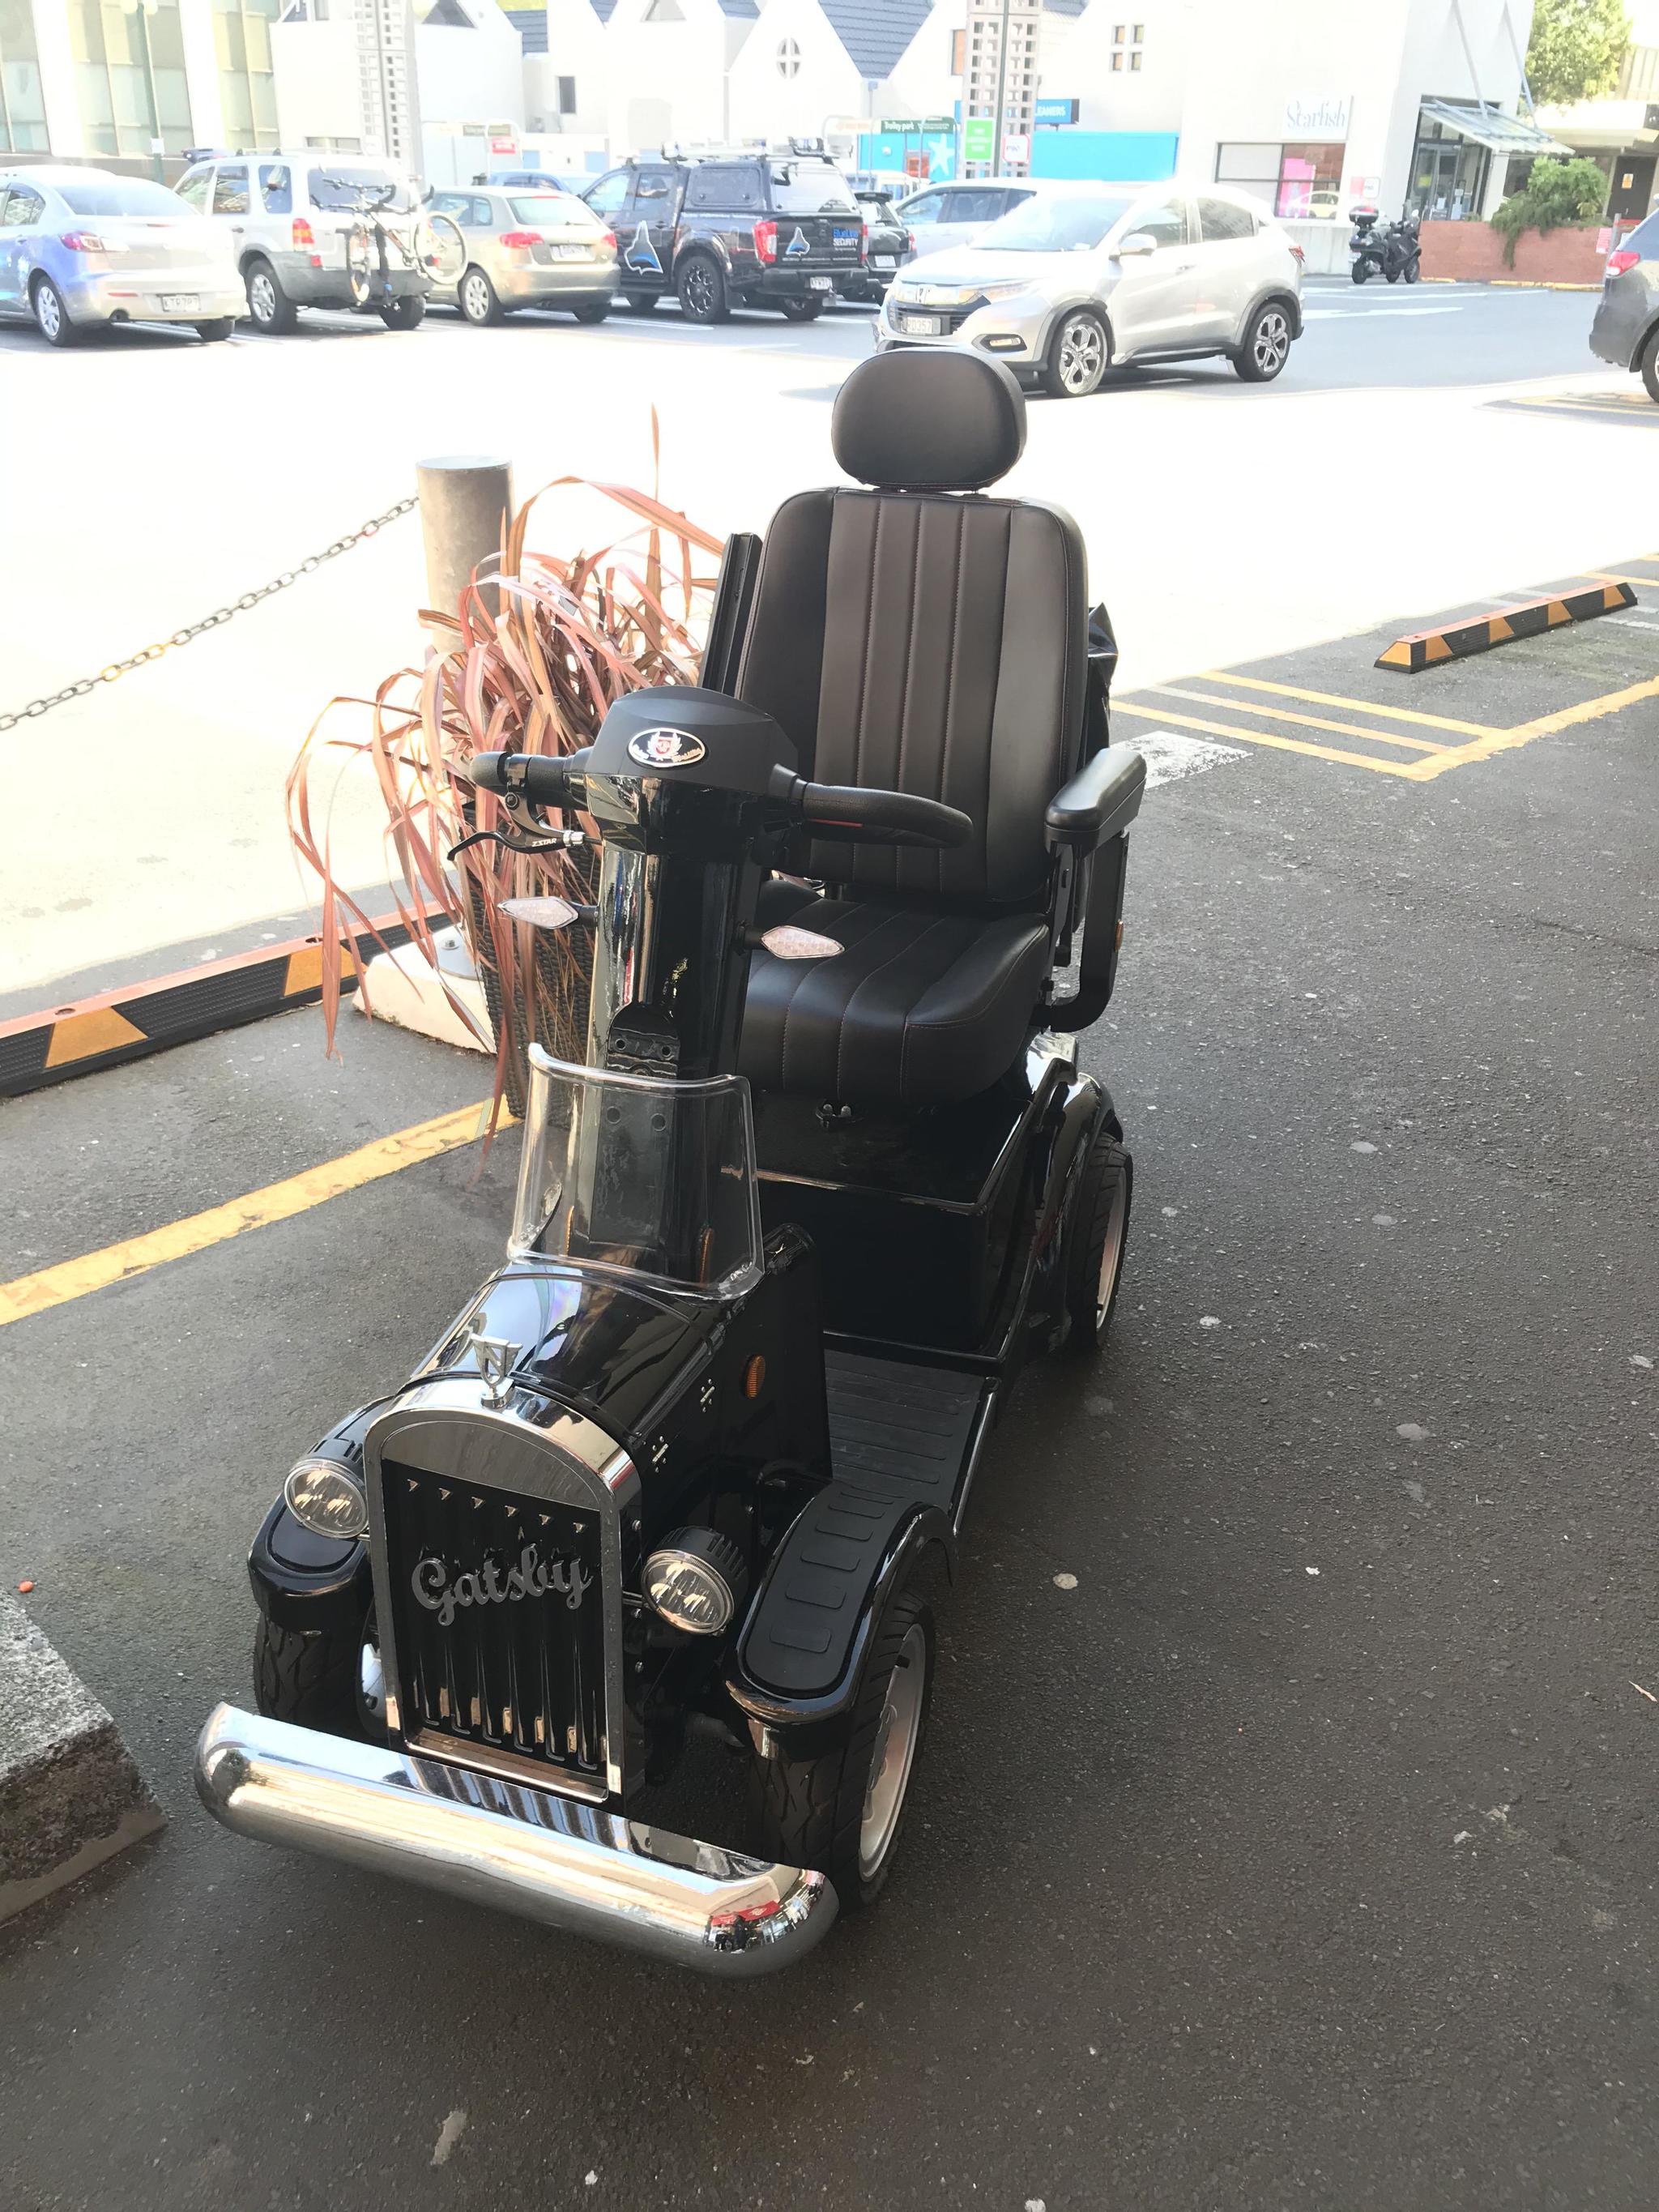 I'm having a hard time finding a definition for this vehicle. - Auto, Scooter, Tuning, Customization